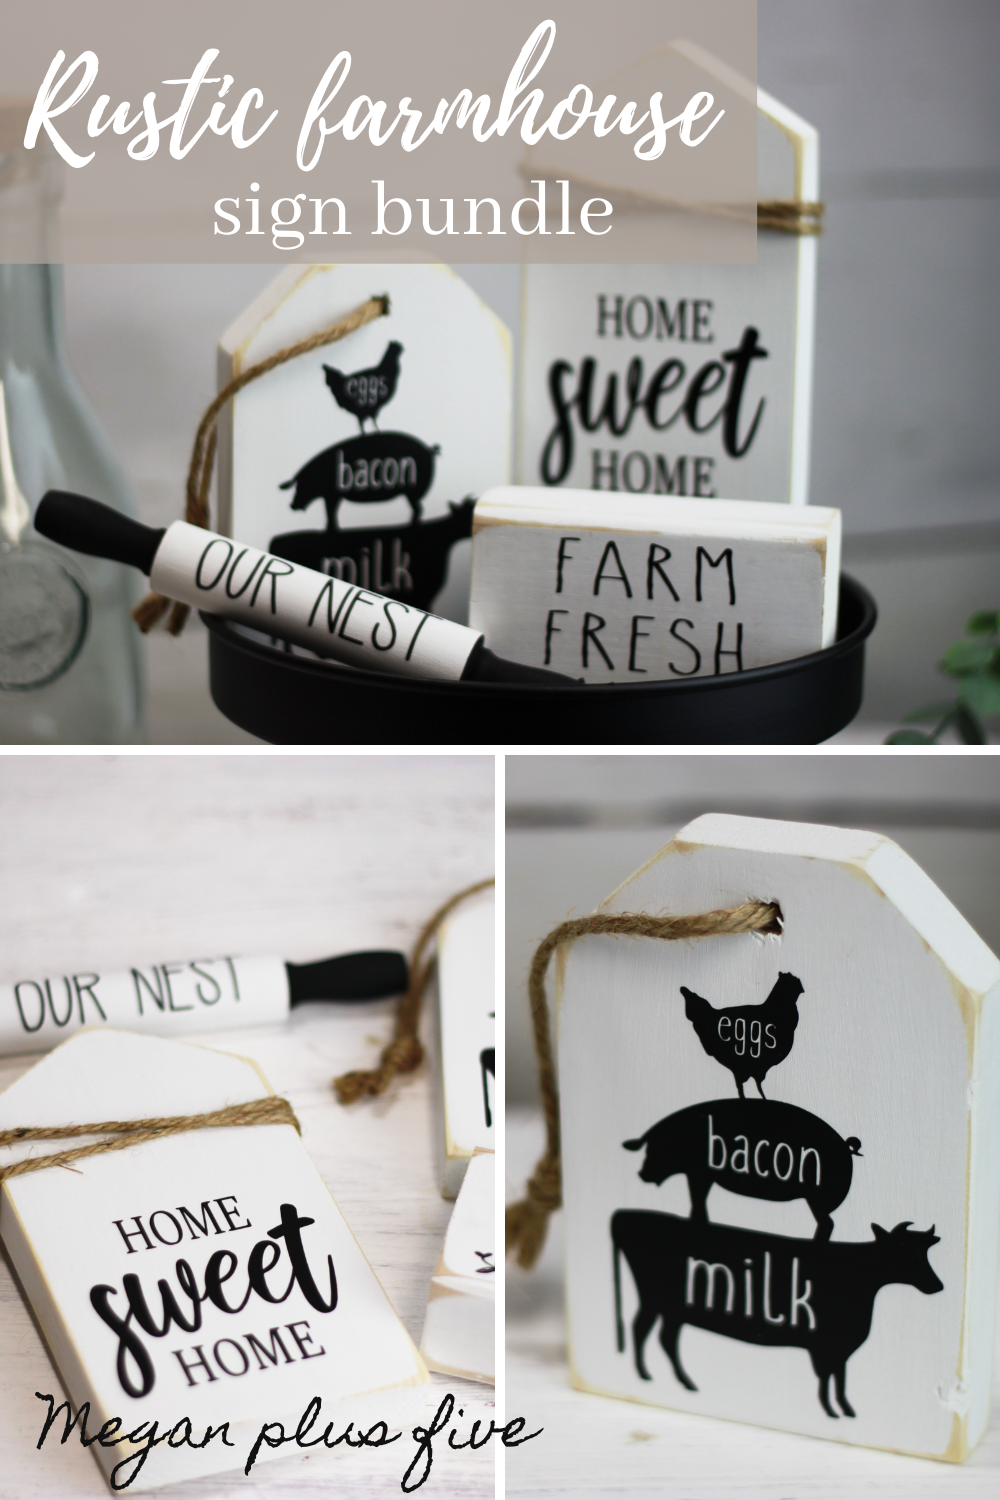 Tiered tray signs for rustic home decor. Classic style mini wood signs in white and black. Sign bundle comes with home sweet home, farm animal trio of chicken pig and cow on a rustic wood tag, mini rolling pin our nest, and farm fresh.